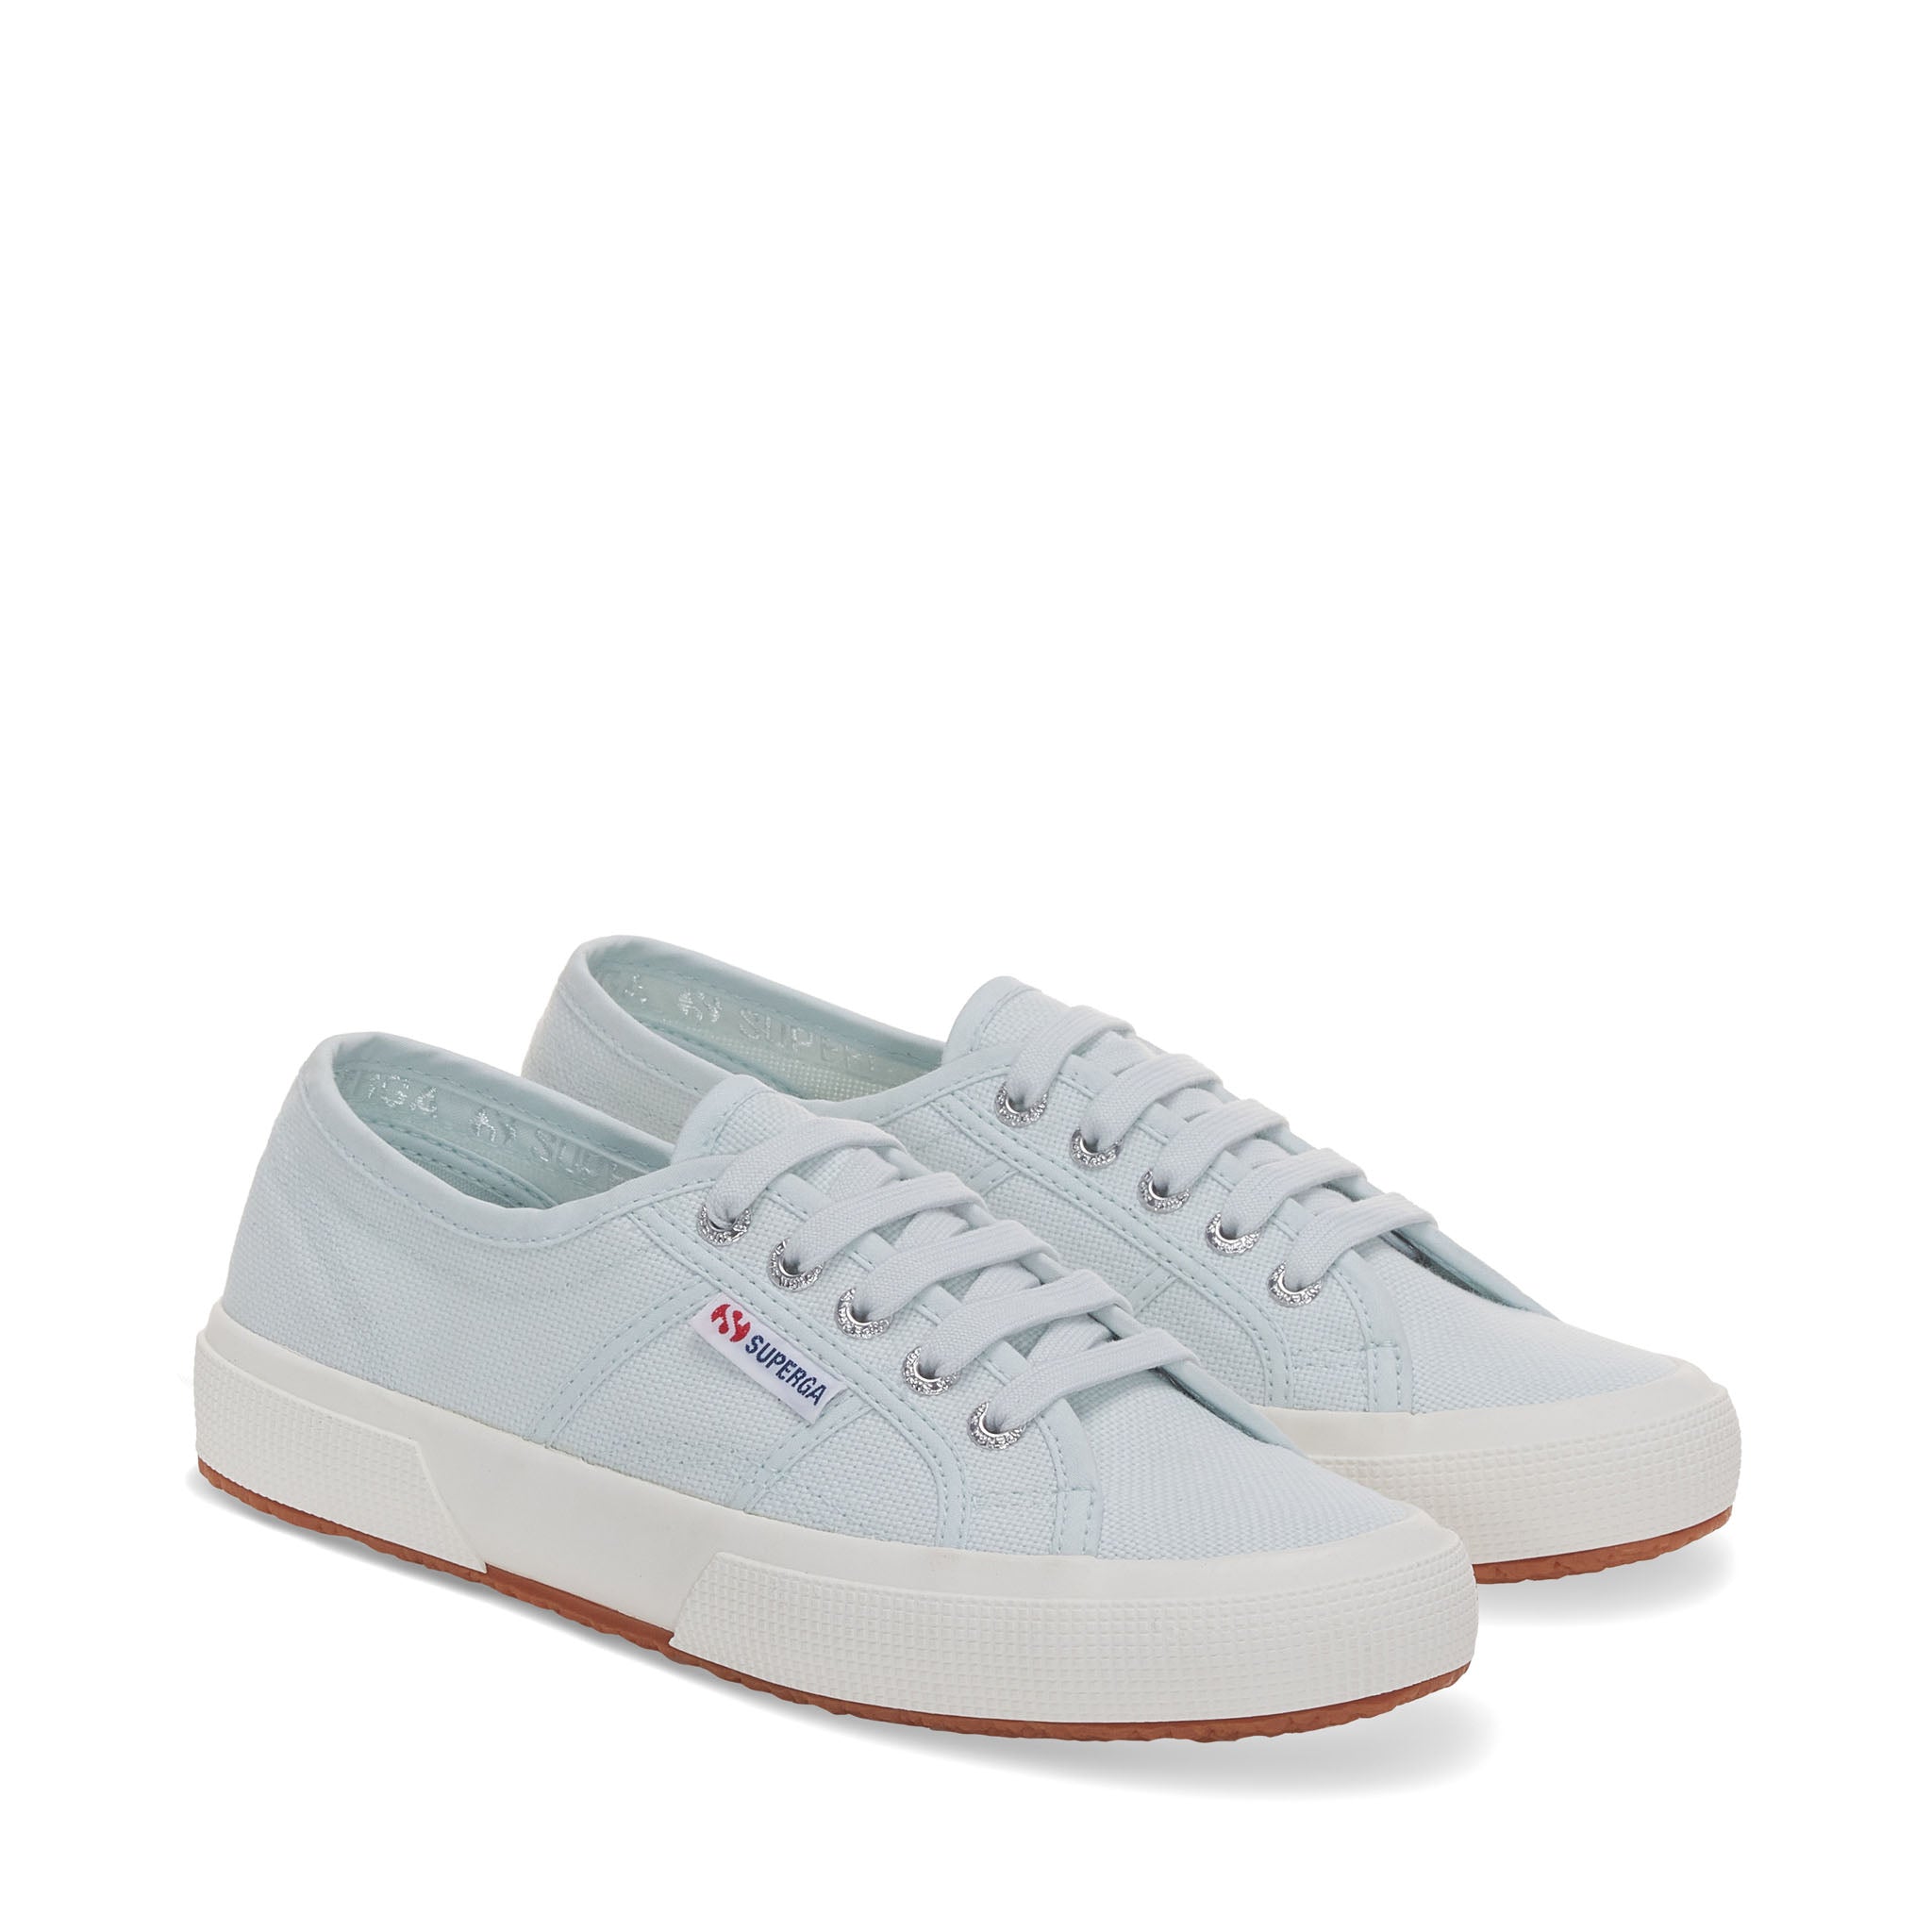 Superga 2750 Cotu Classic Sneakers - Azure Ice. Front view.